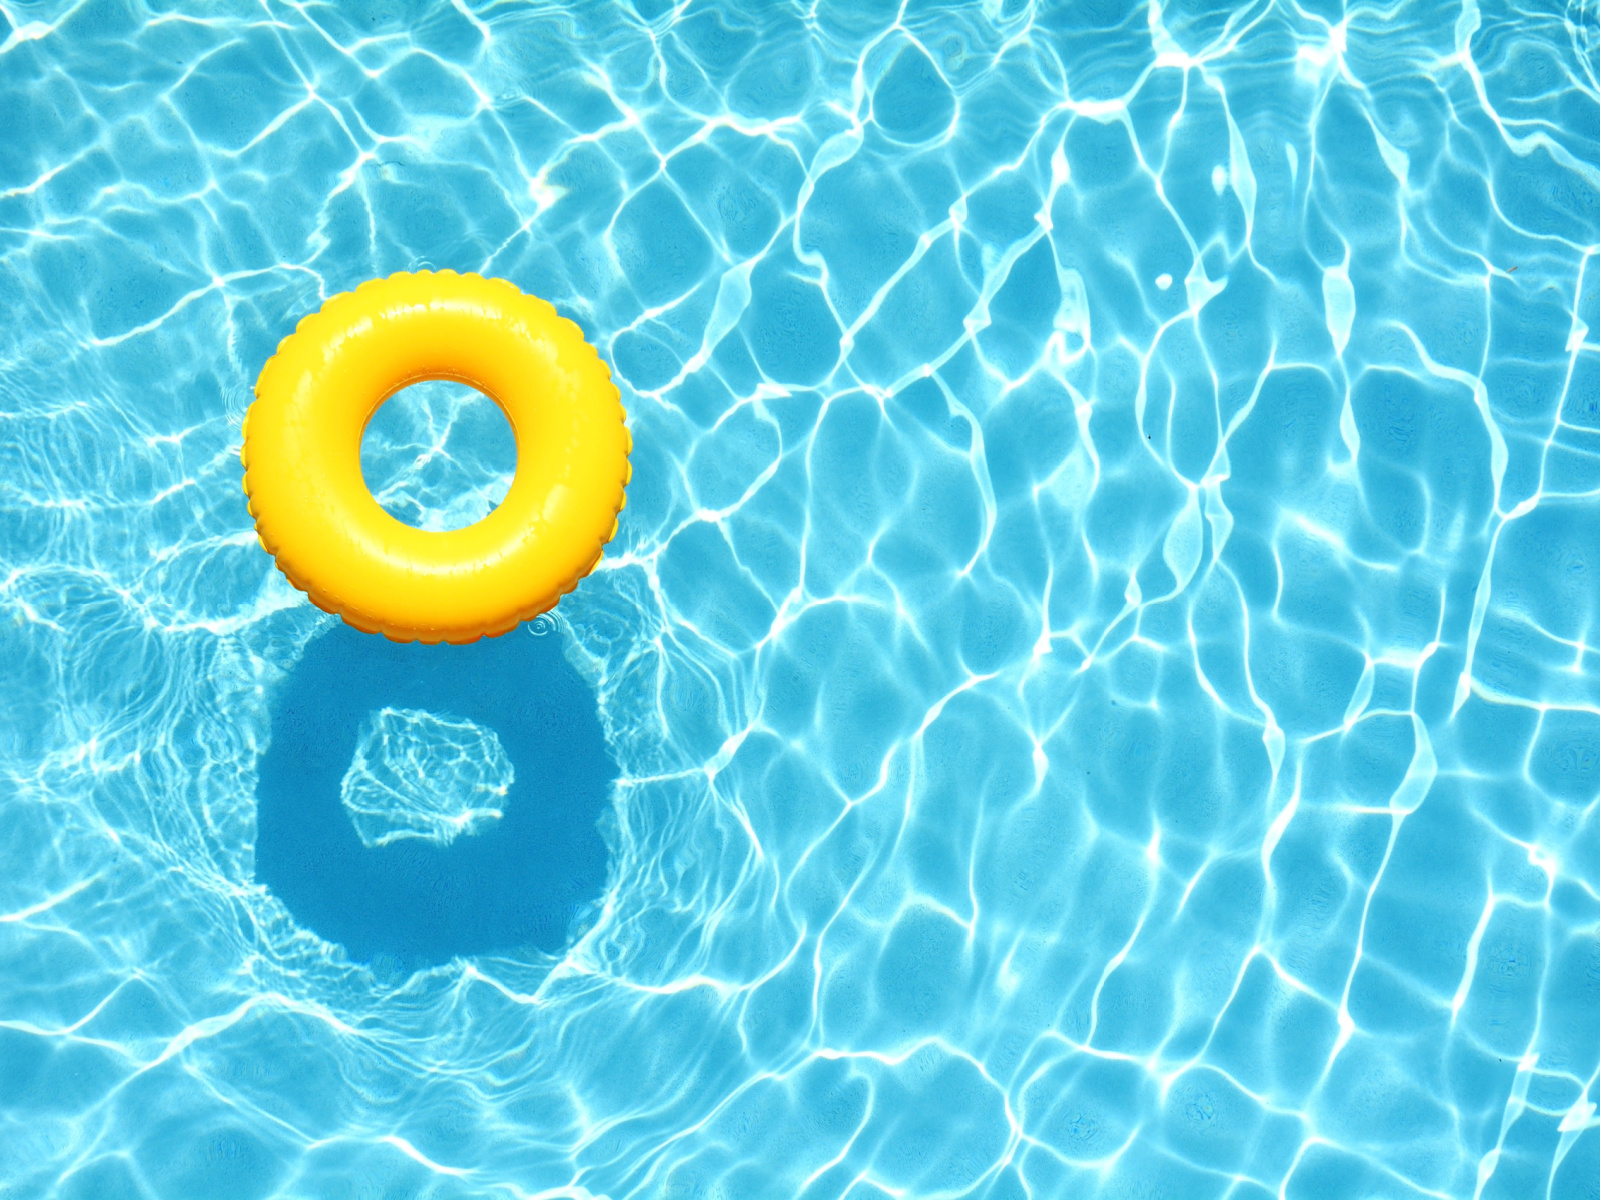 Can You Drink Swimming Pool Water In An Emergency?